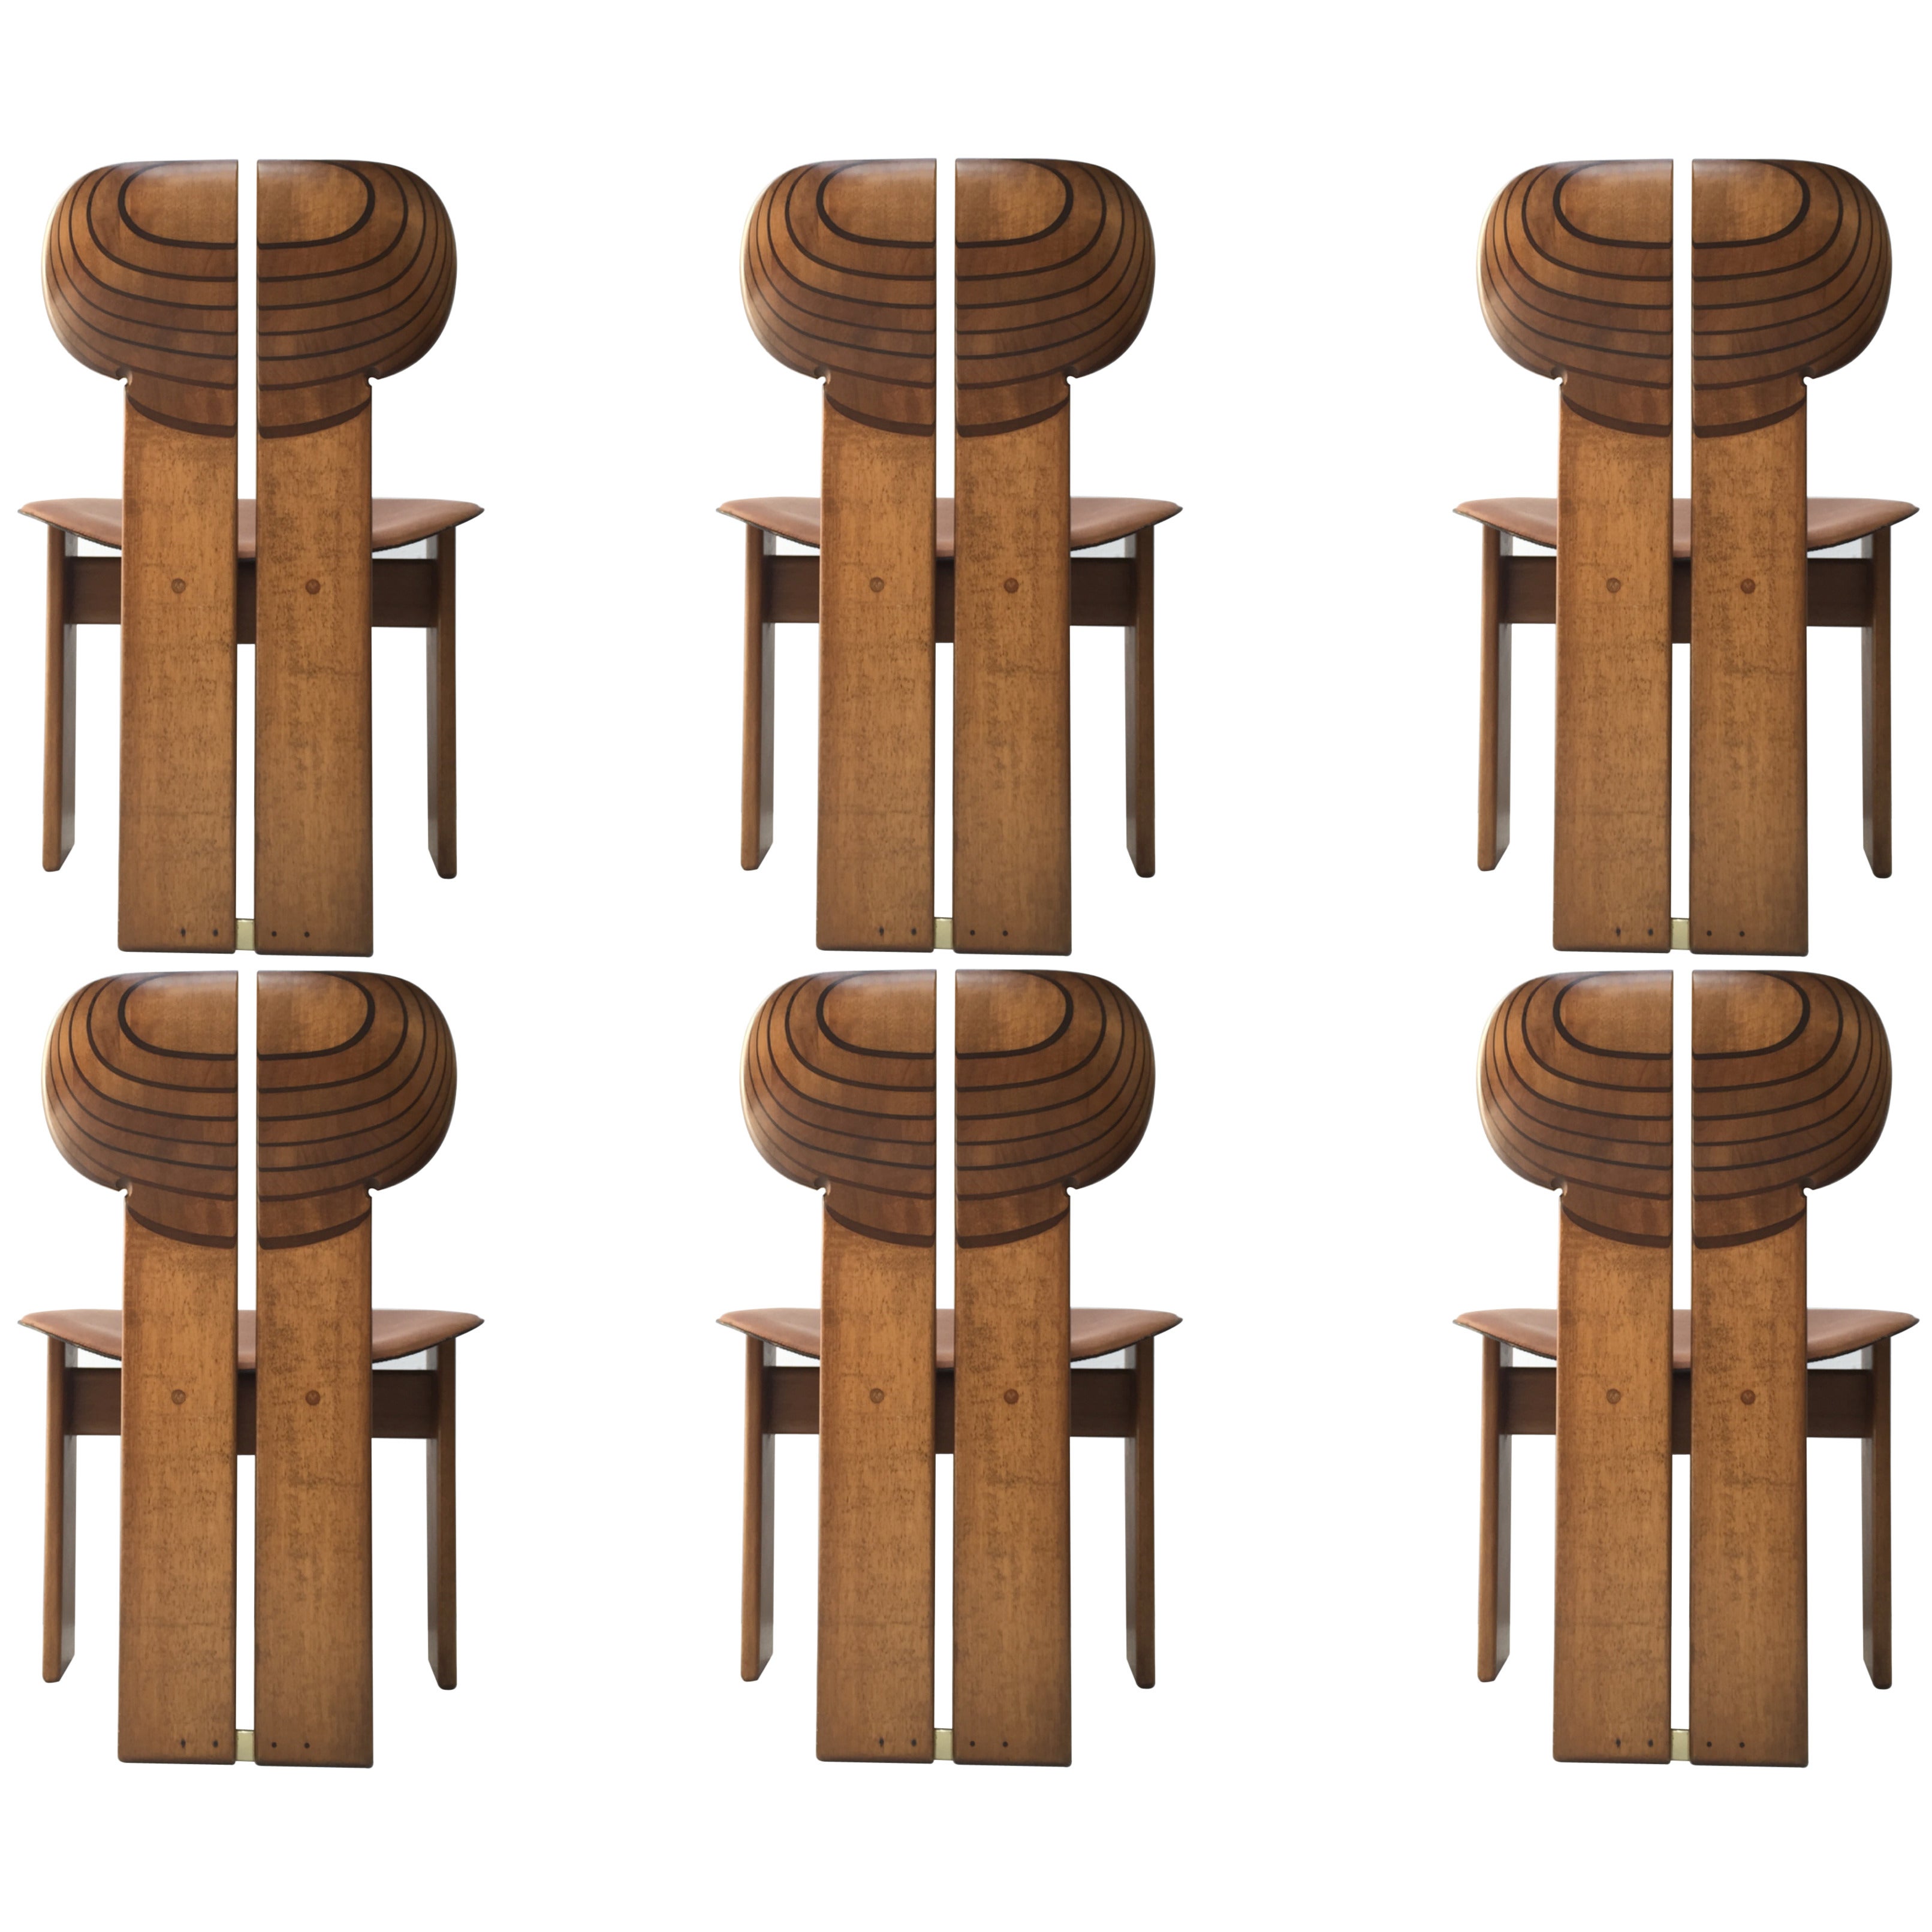 'Africa' Chairs by Scarpa, Finished in Walnut, Ebony and Leather, Signed